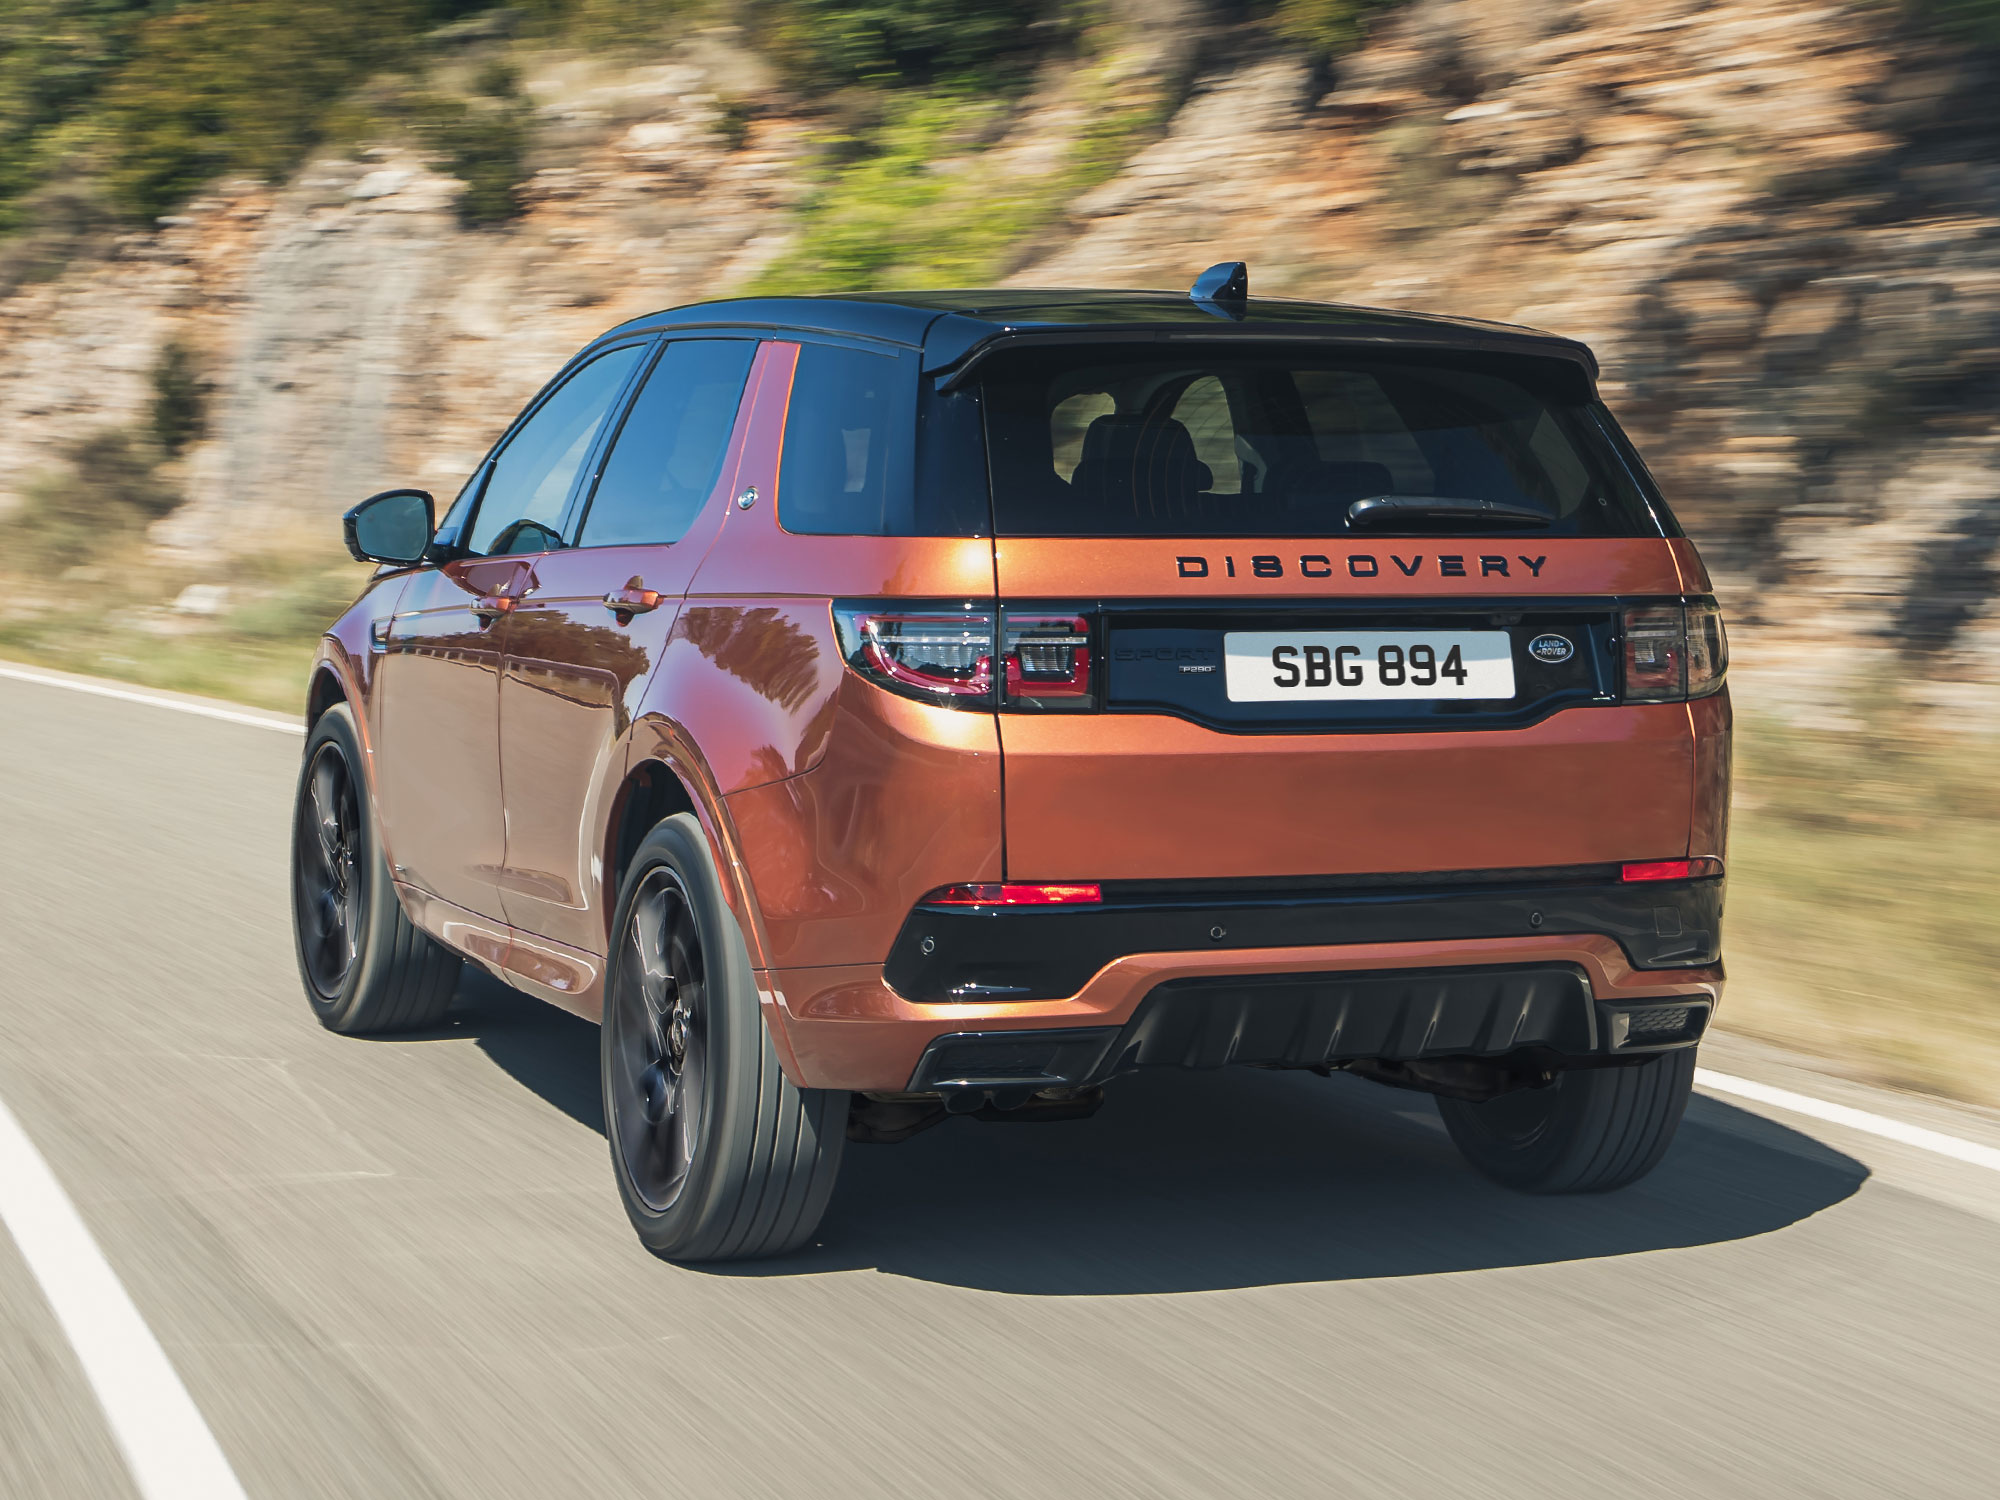 range rover discovery sport prices